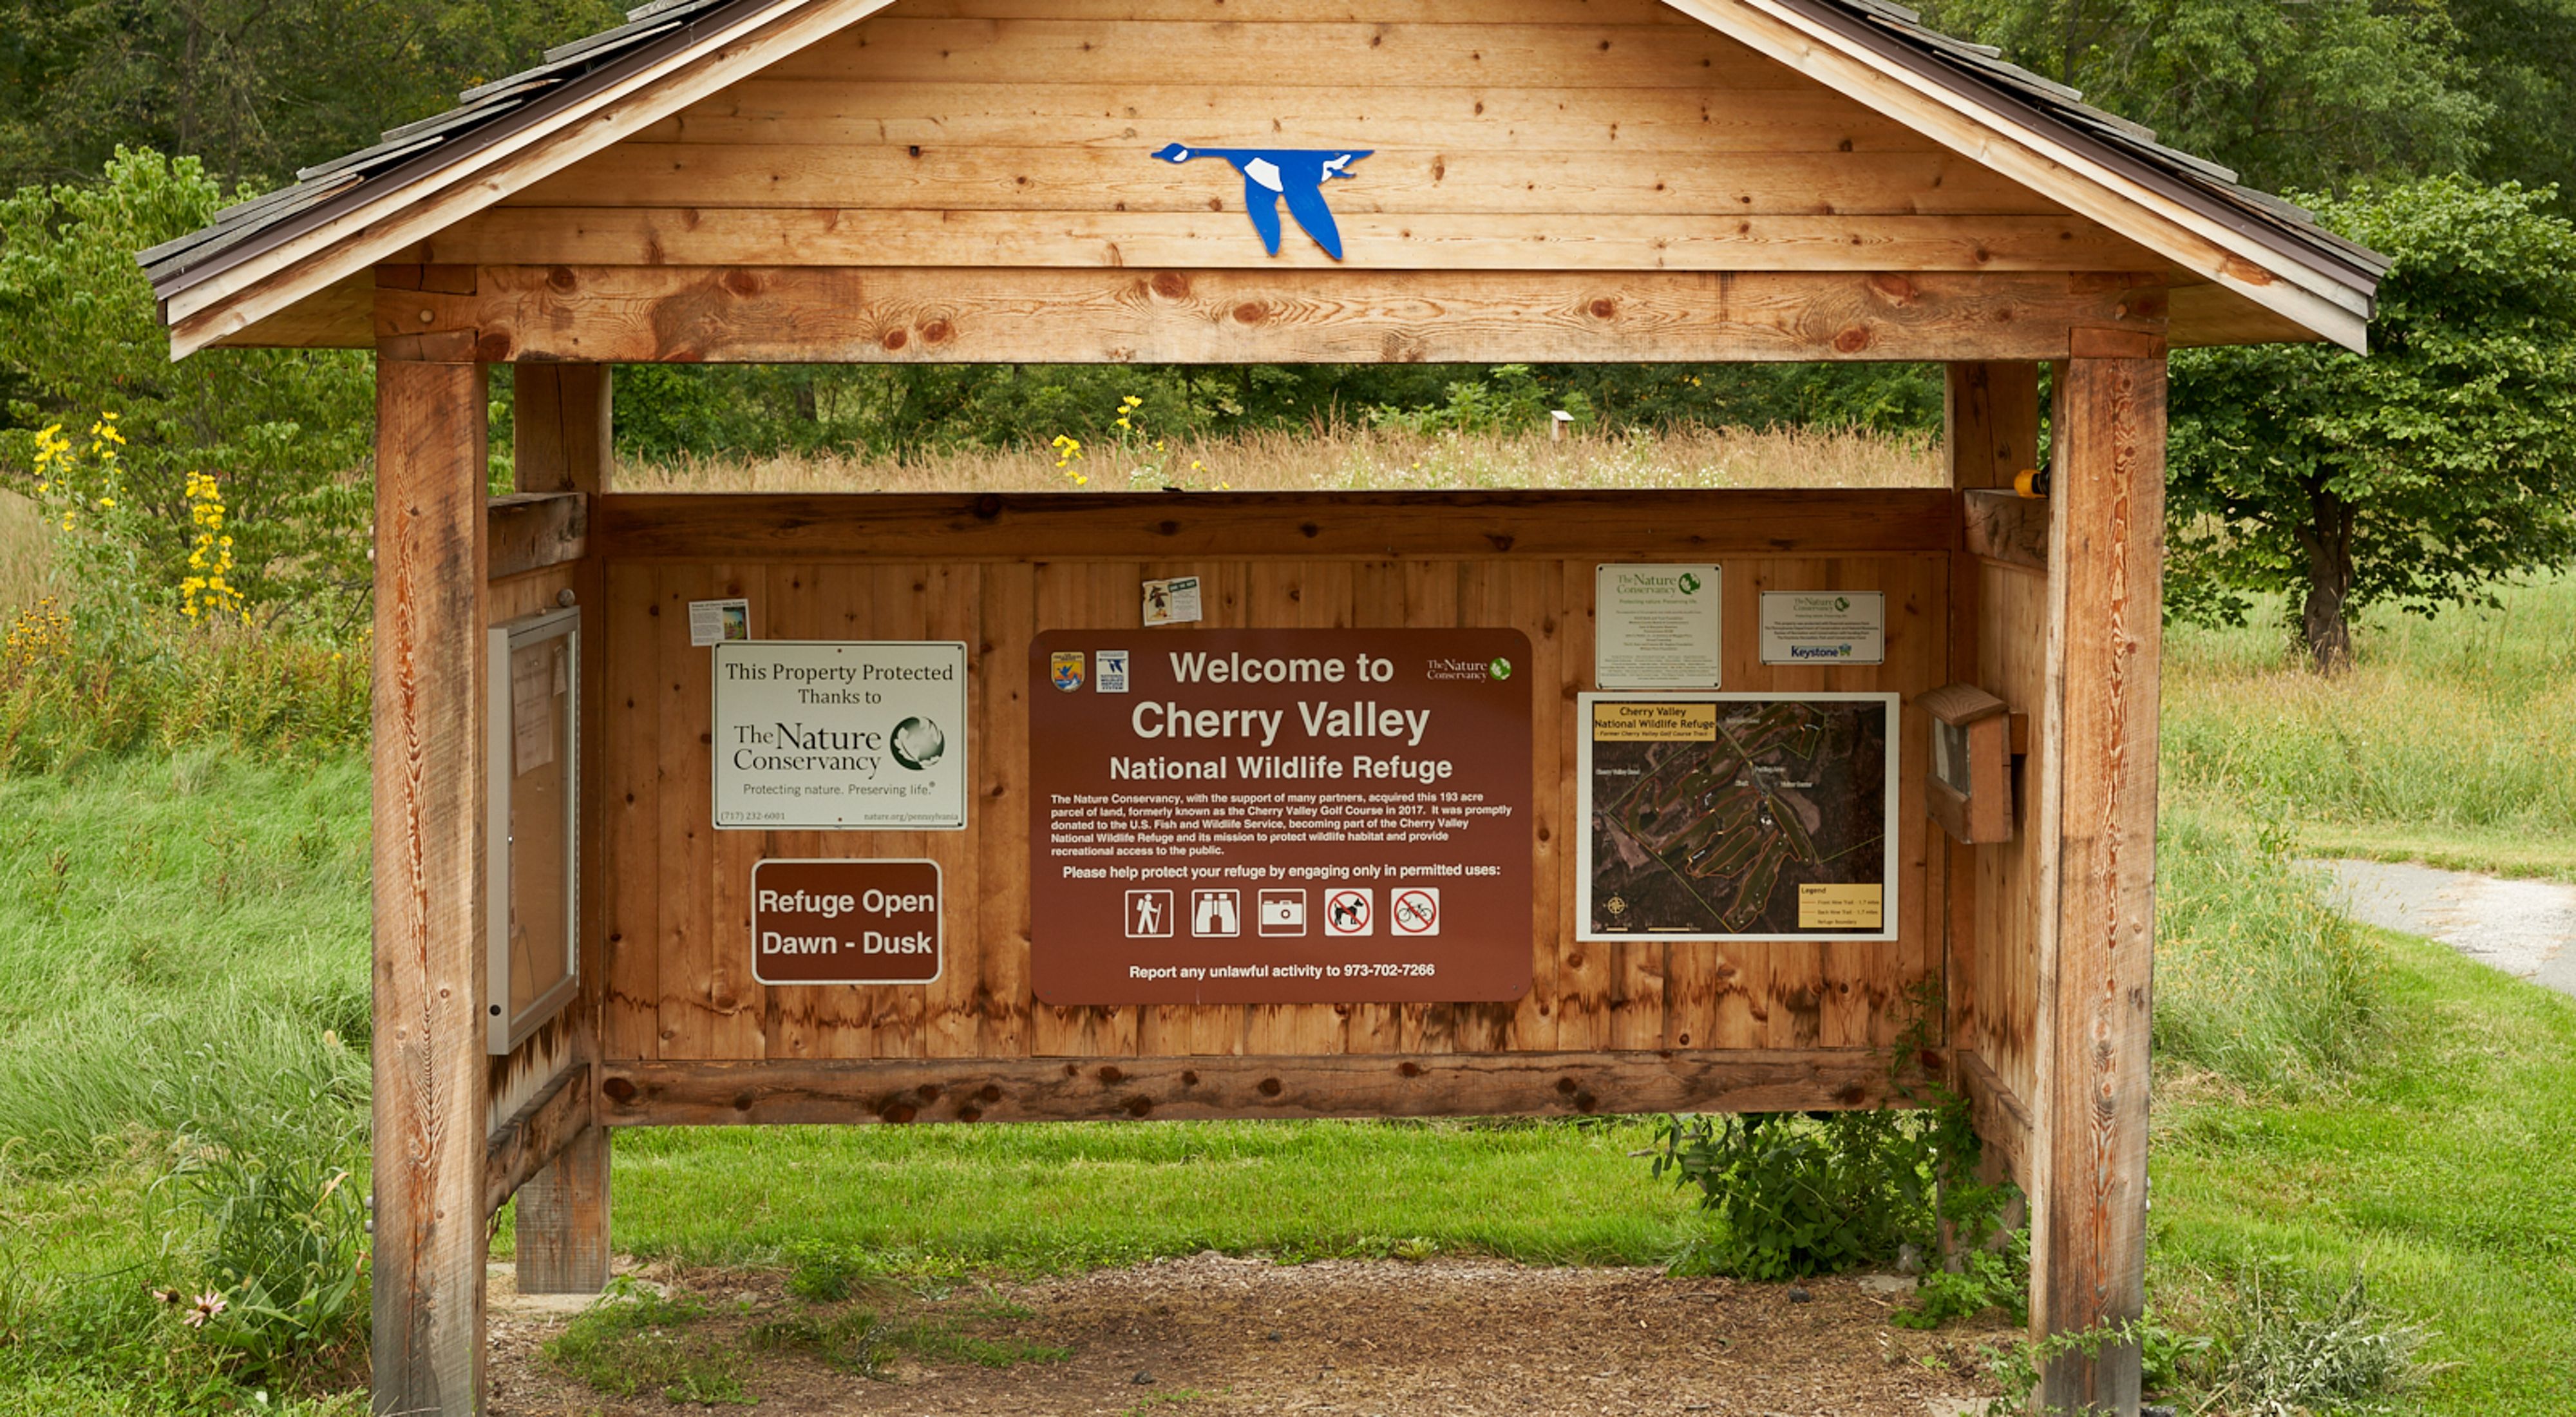 A wooden kiosk welcome visitors to Cherry Valley. The interior wall of the covered kiosk is covered with signs and maps providing visitor information.